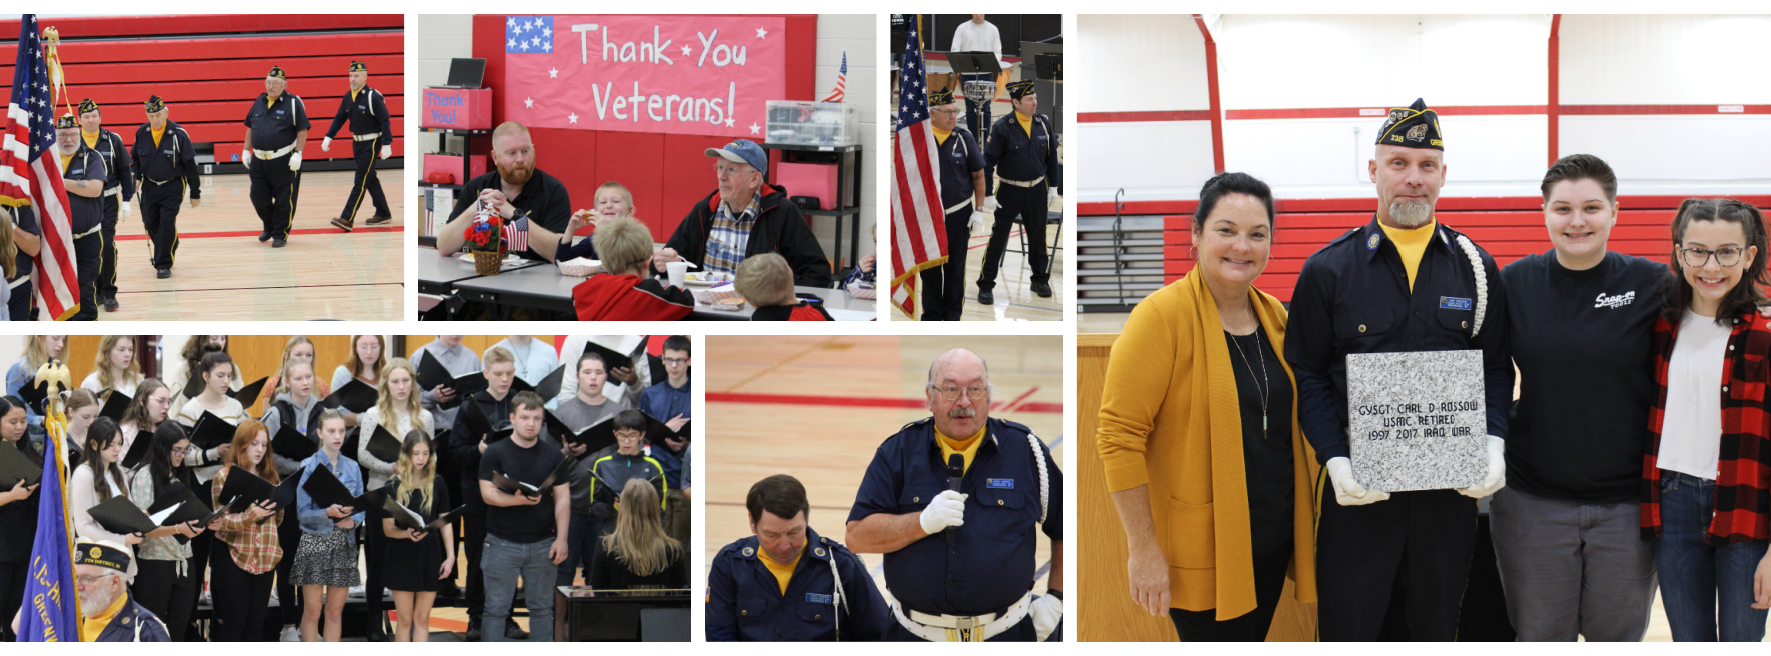 Veterans Day collage